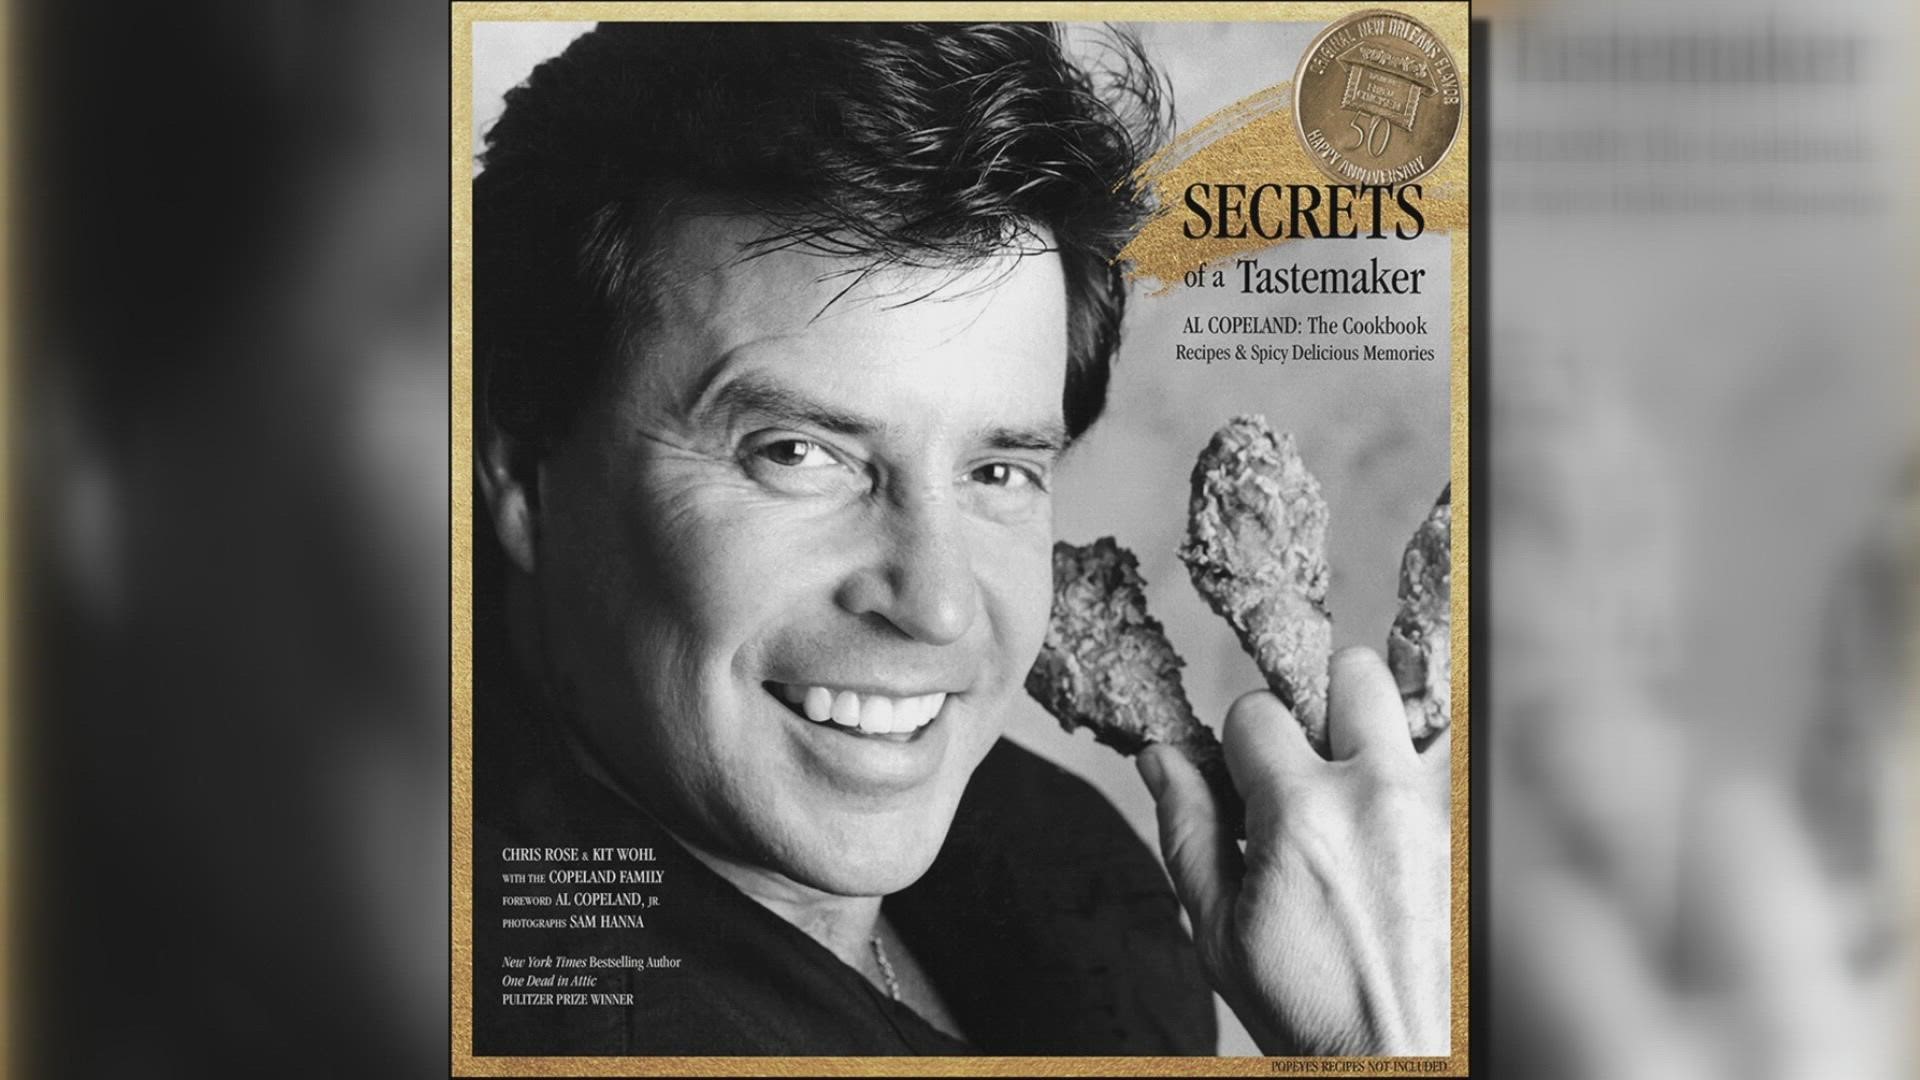 The Cookbook has more than 100 recipes and stories about Al Copeland.